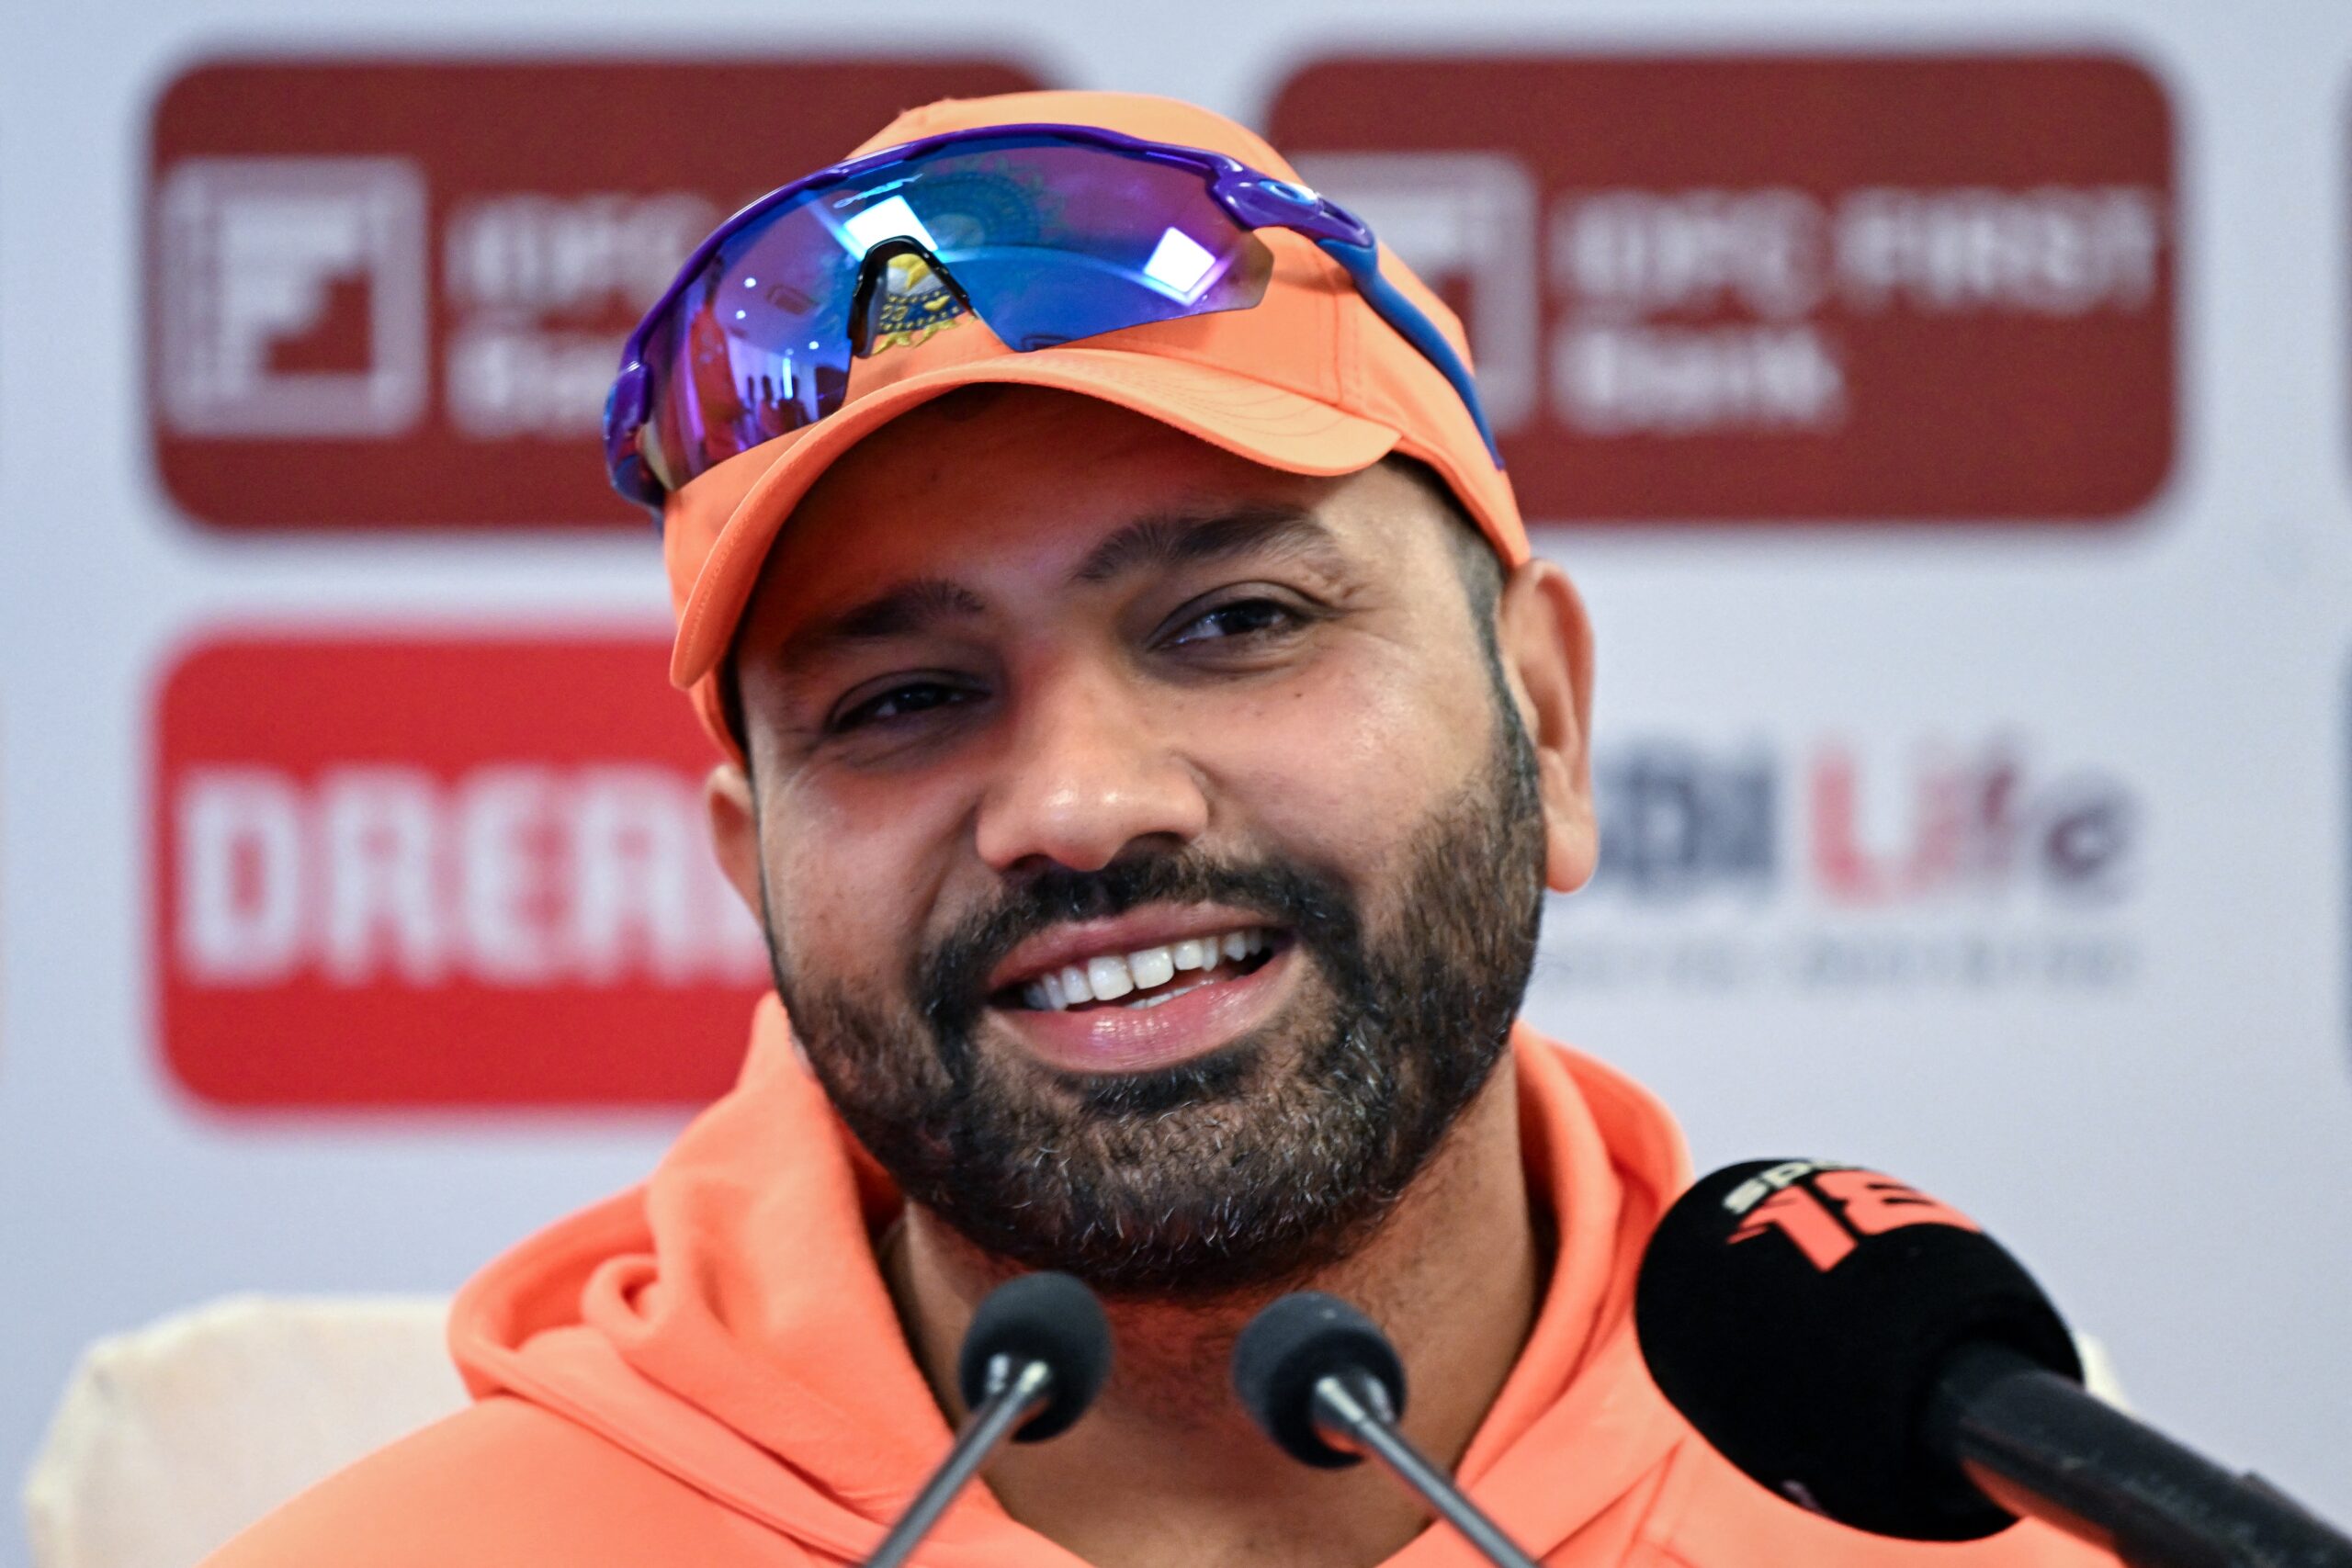 “Should I Say What Rohit Sharma Said?”: Ex England Star Gets Rishabh Pant Reminder In Commentary Box